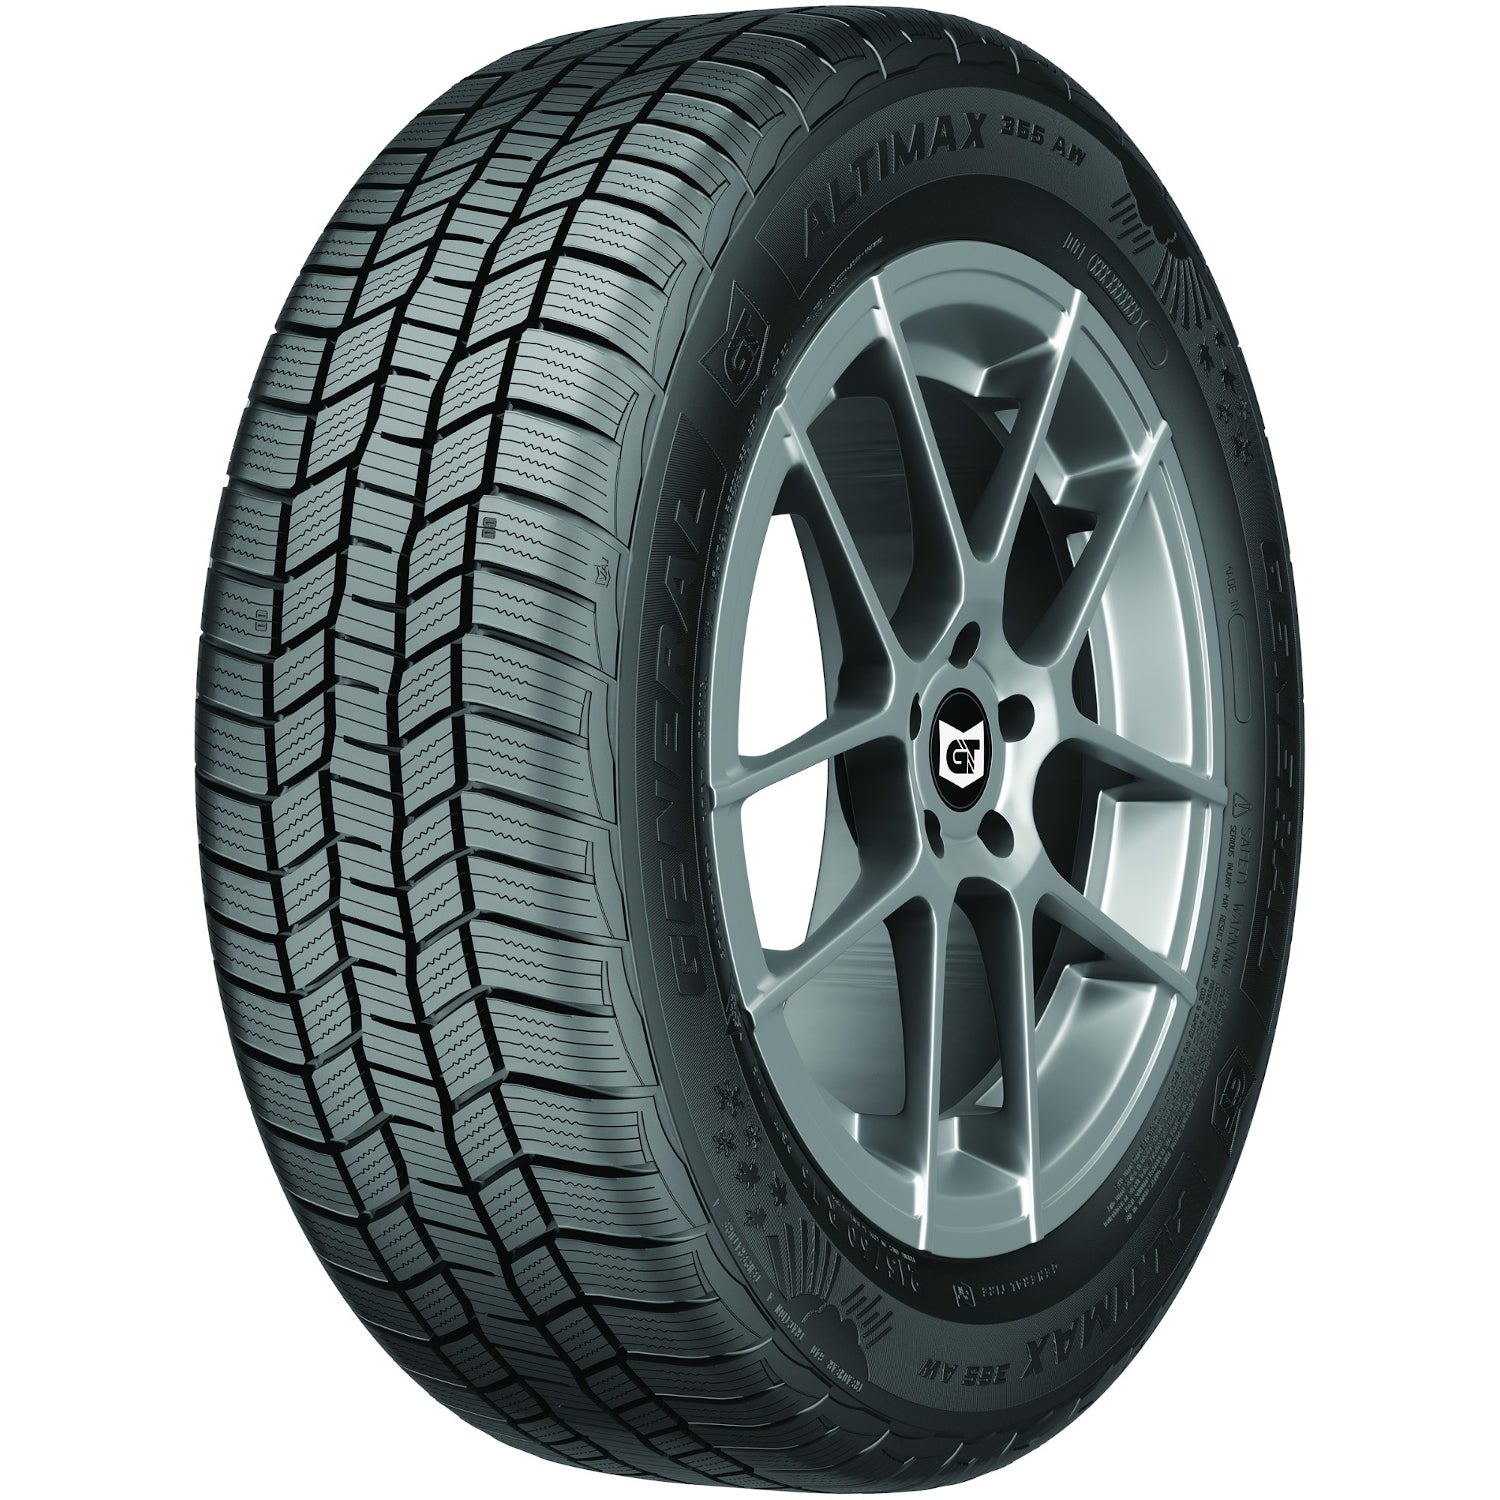 GENERAL ALTIMAX 365AW 215/60R17 (27.2X8.5R 17) Tires